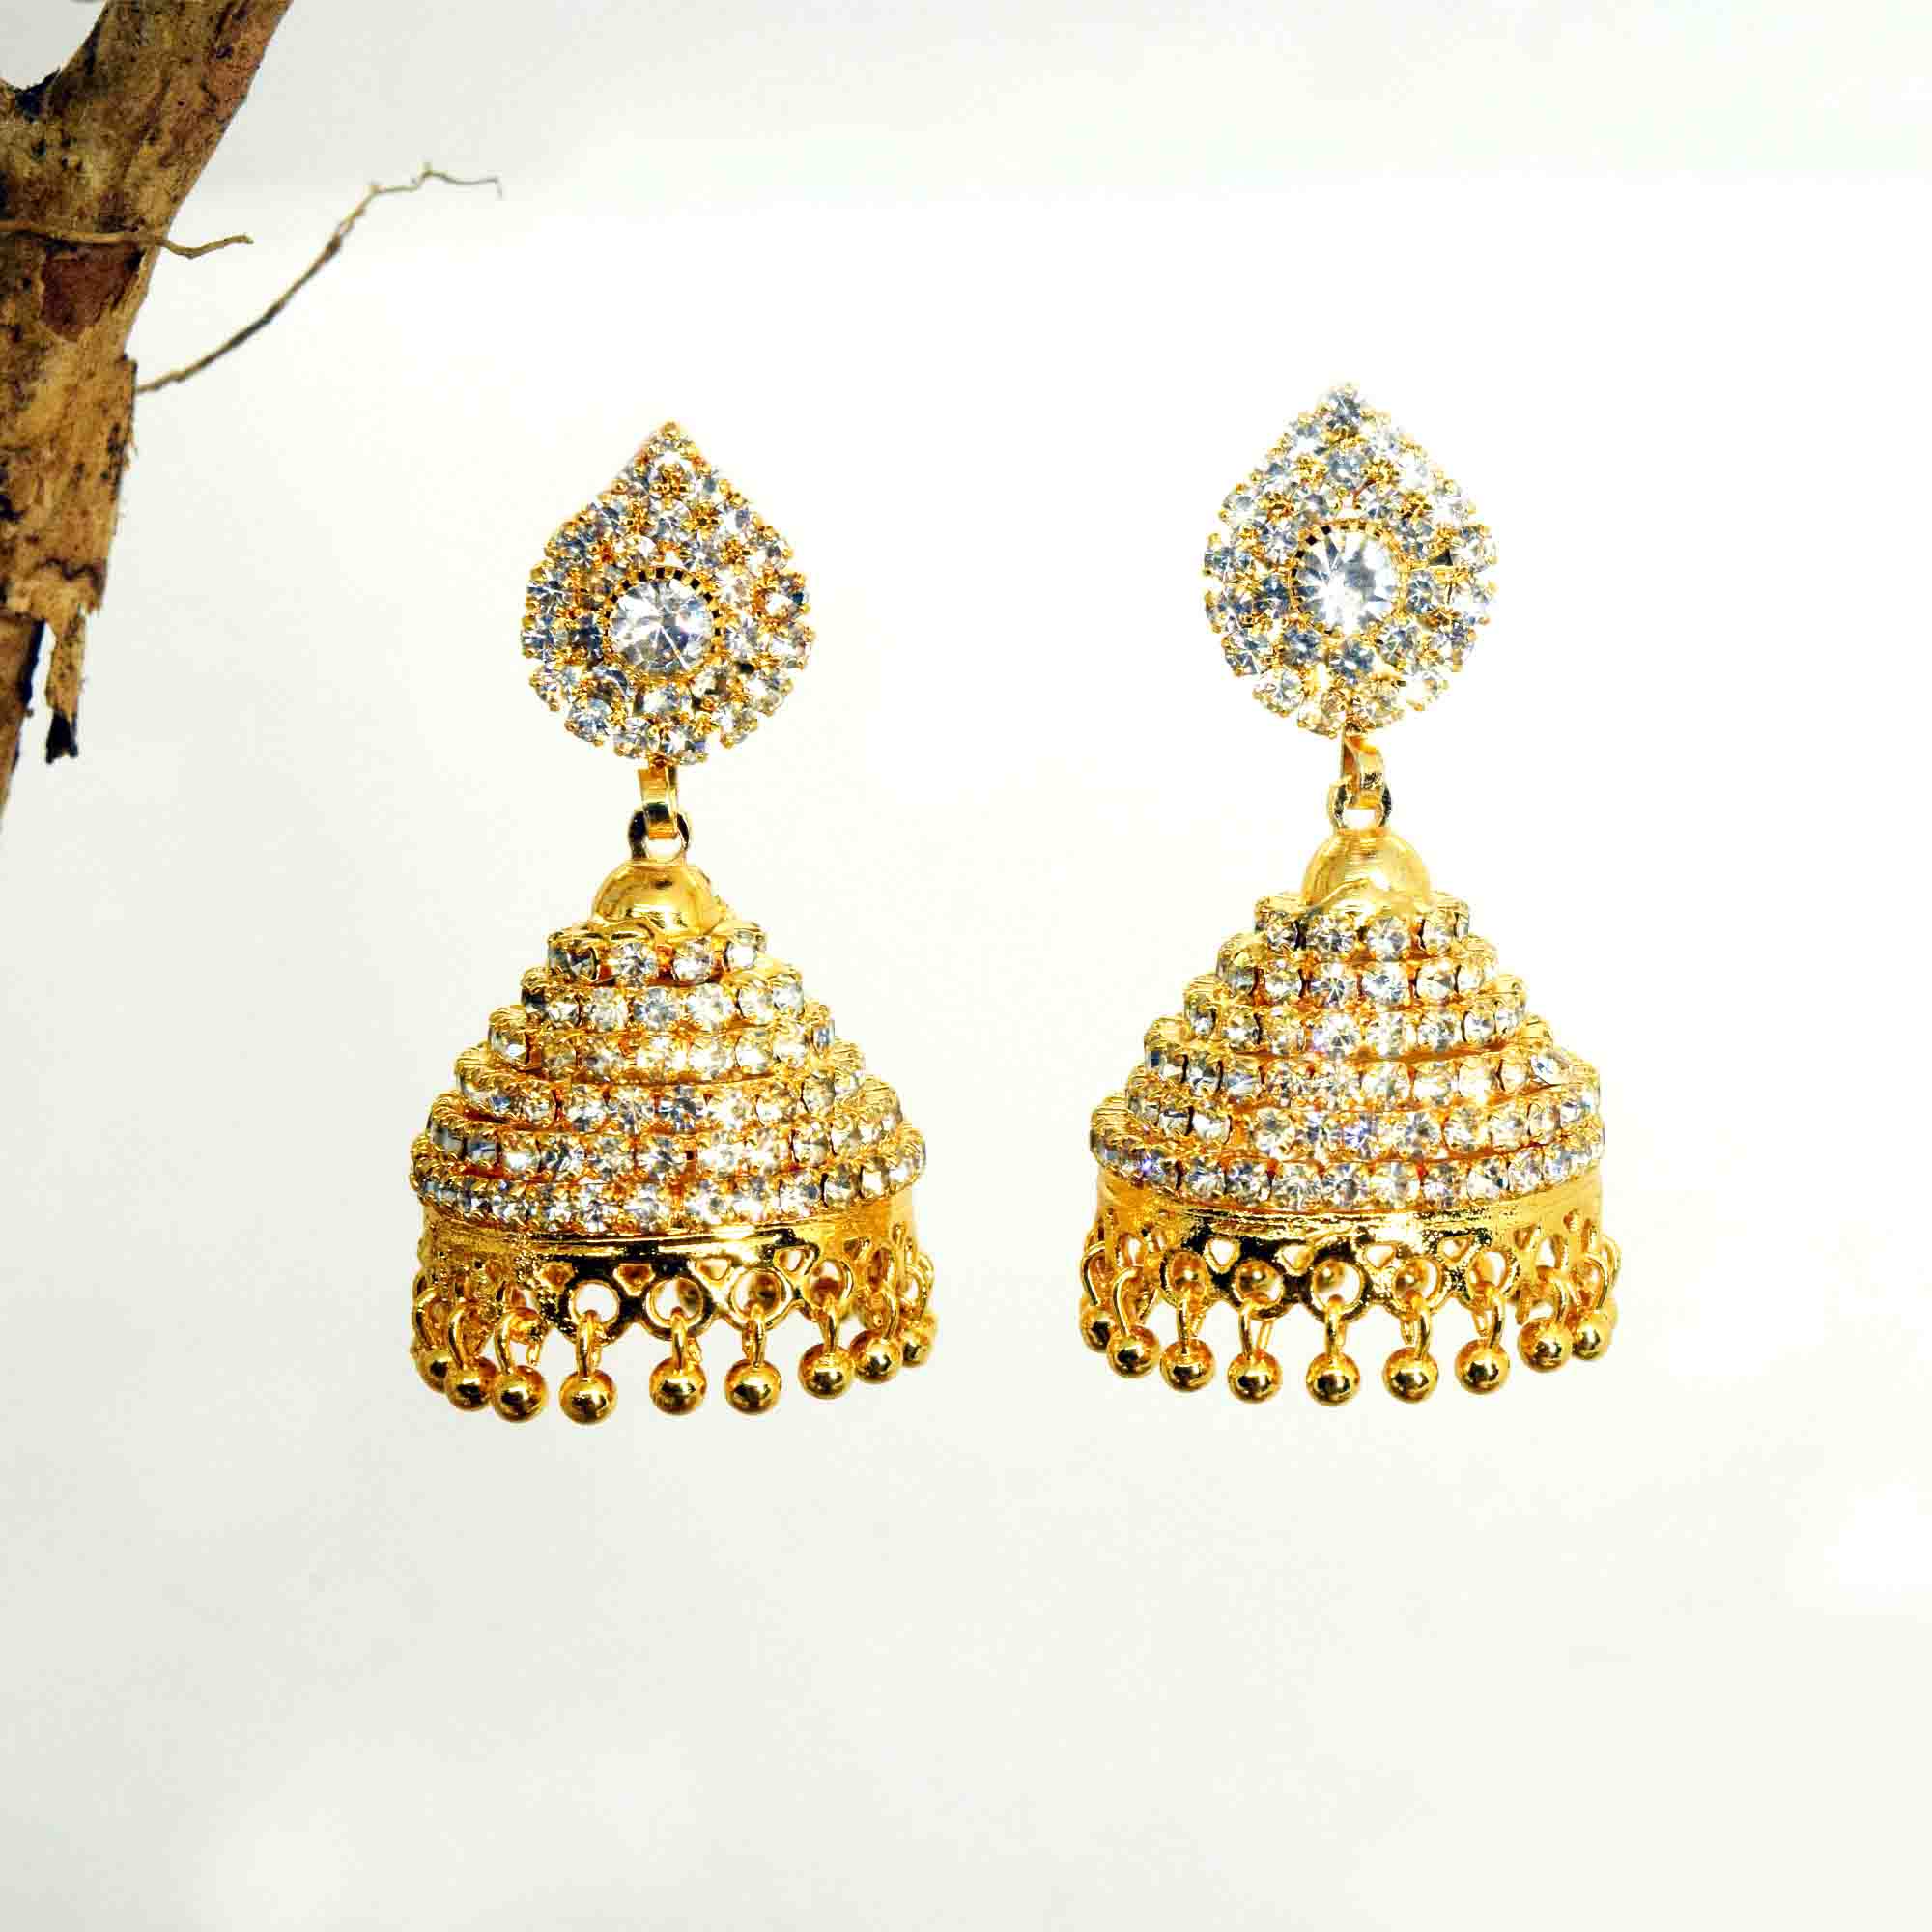 Gold Plated Jimikki Earrings With Fixed Stone Drop earrings NowBuy.lk 5